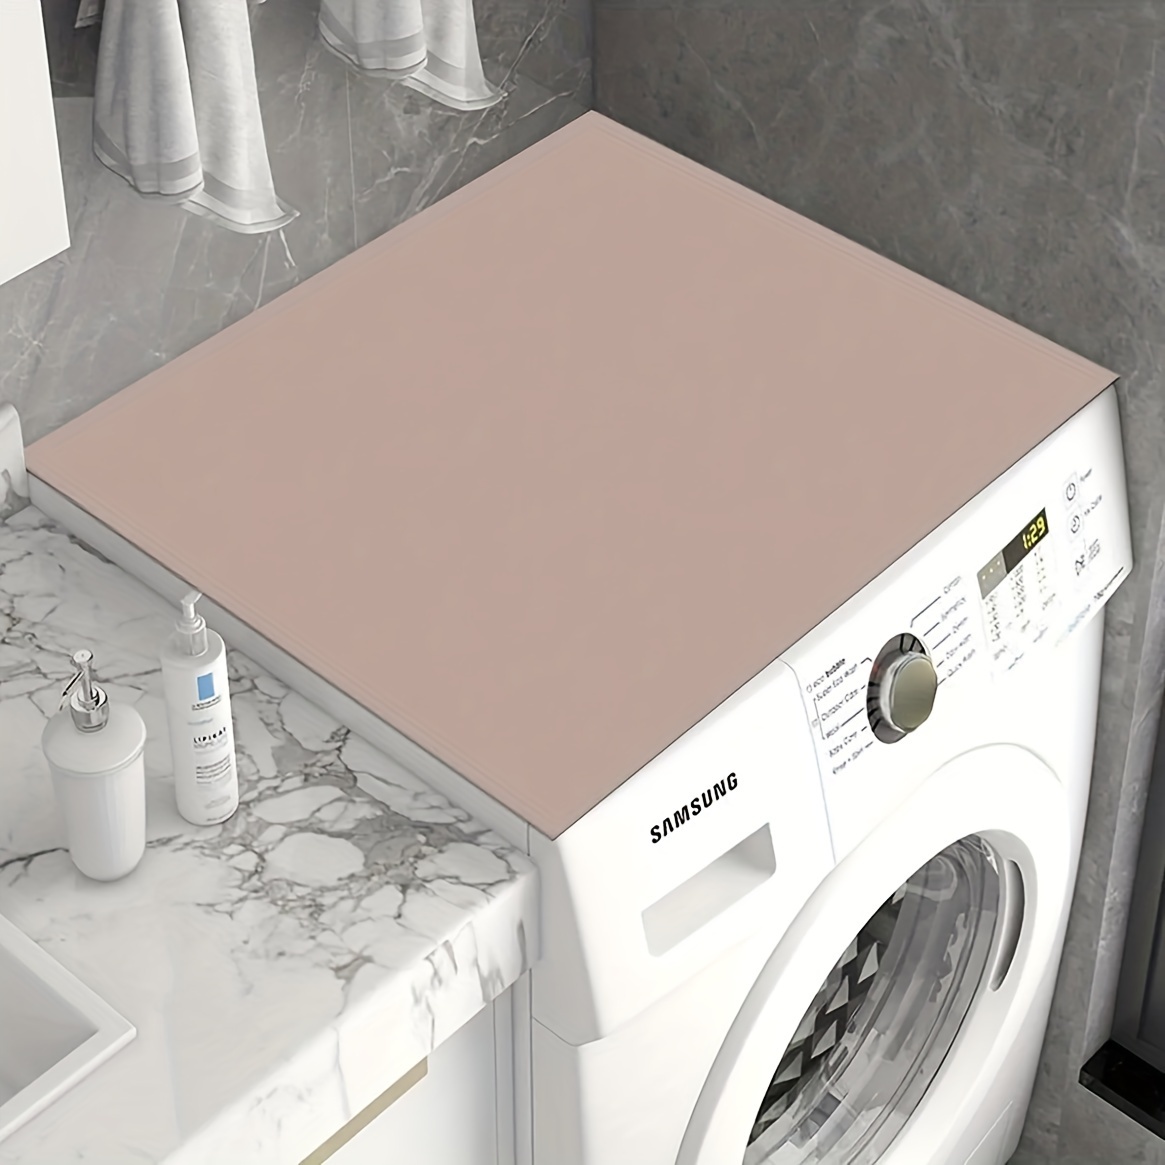 Washer And Dryer Top Protector, Protective Silicone Rubber Mat For